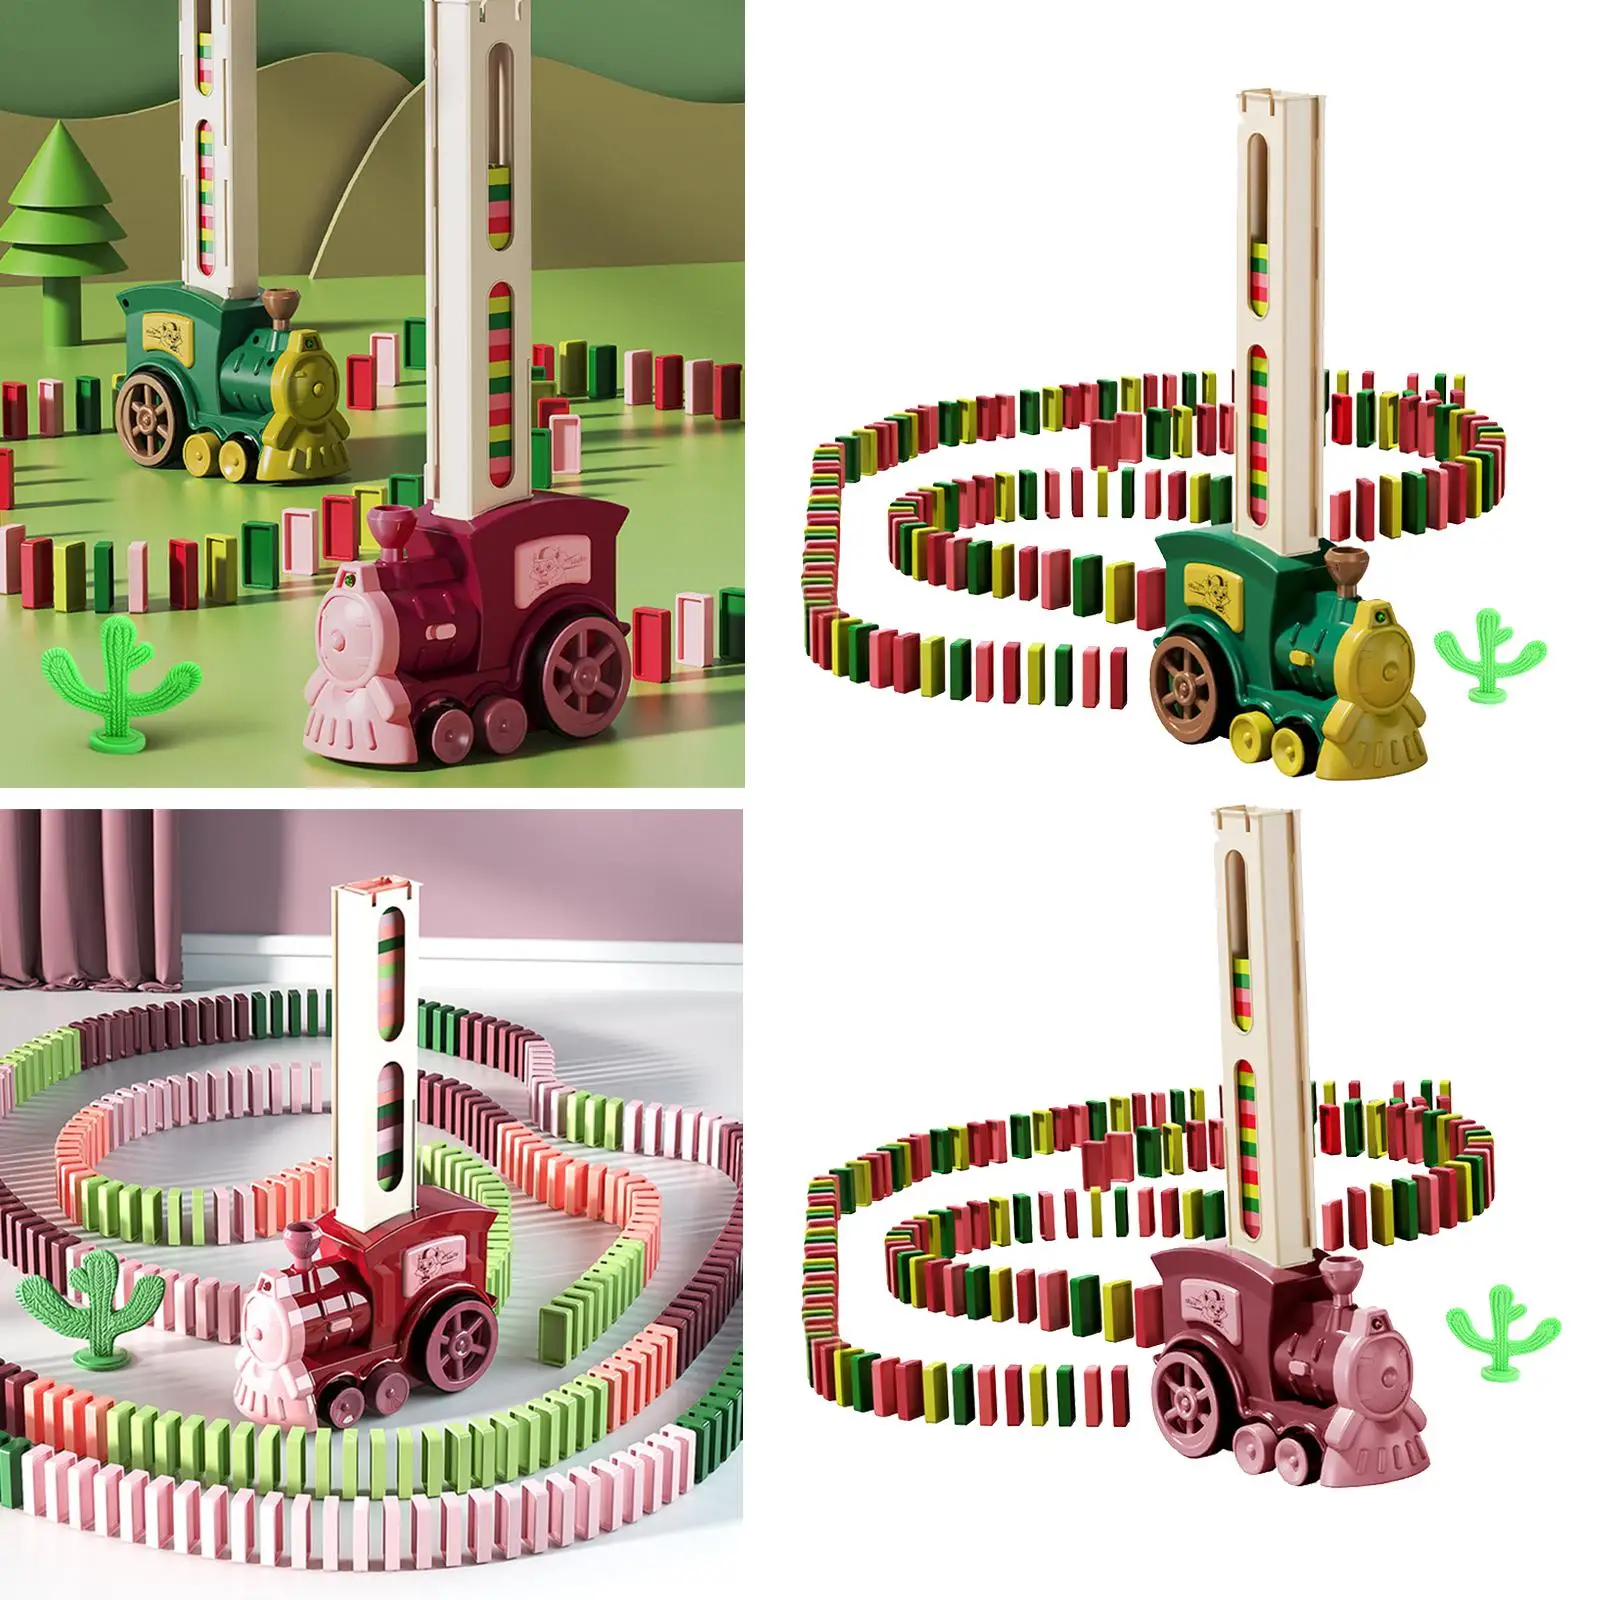 Electric Train Blocks Toys Laying Brick Blocks Games with Sound for Boys